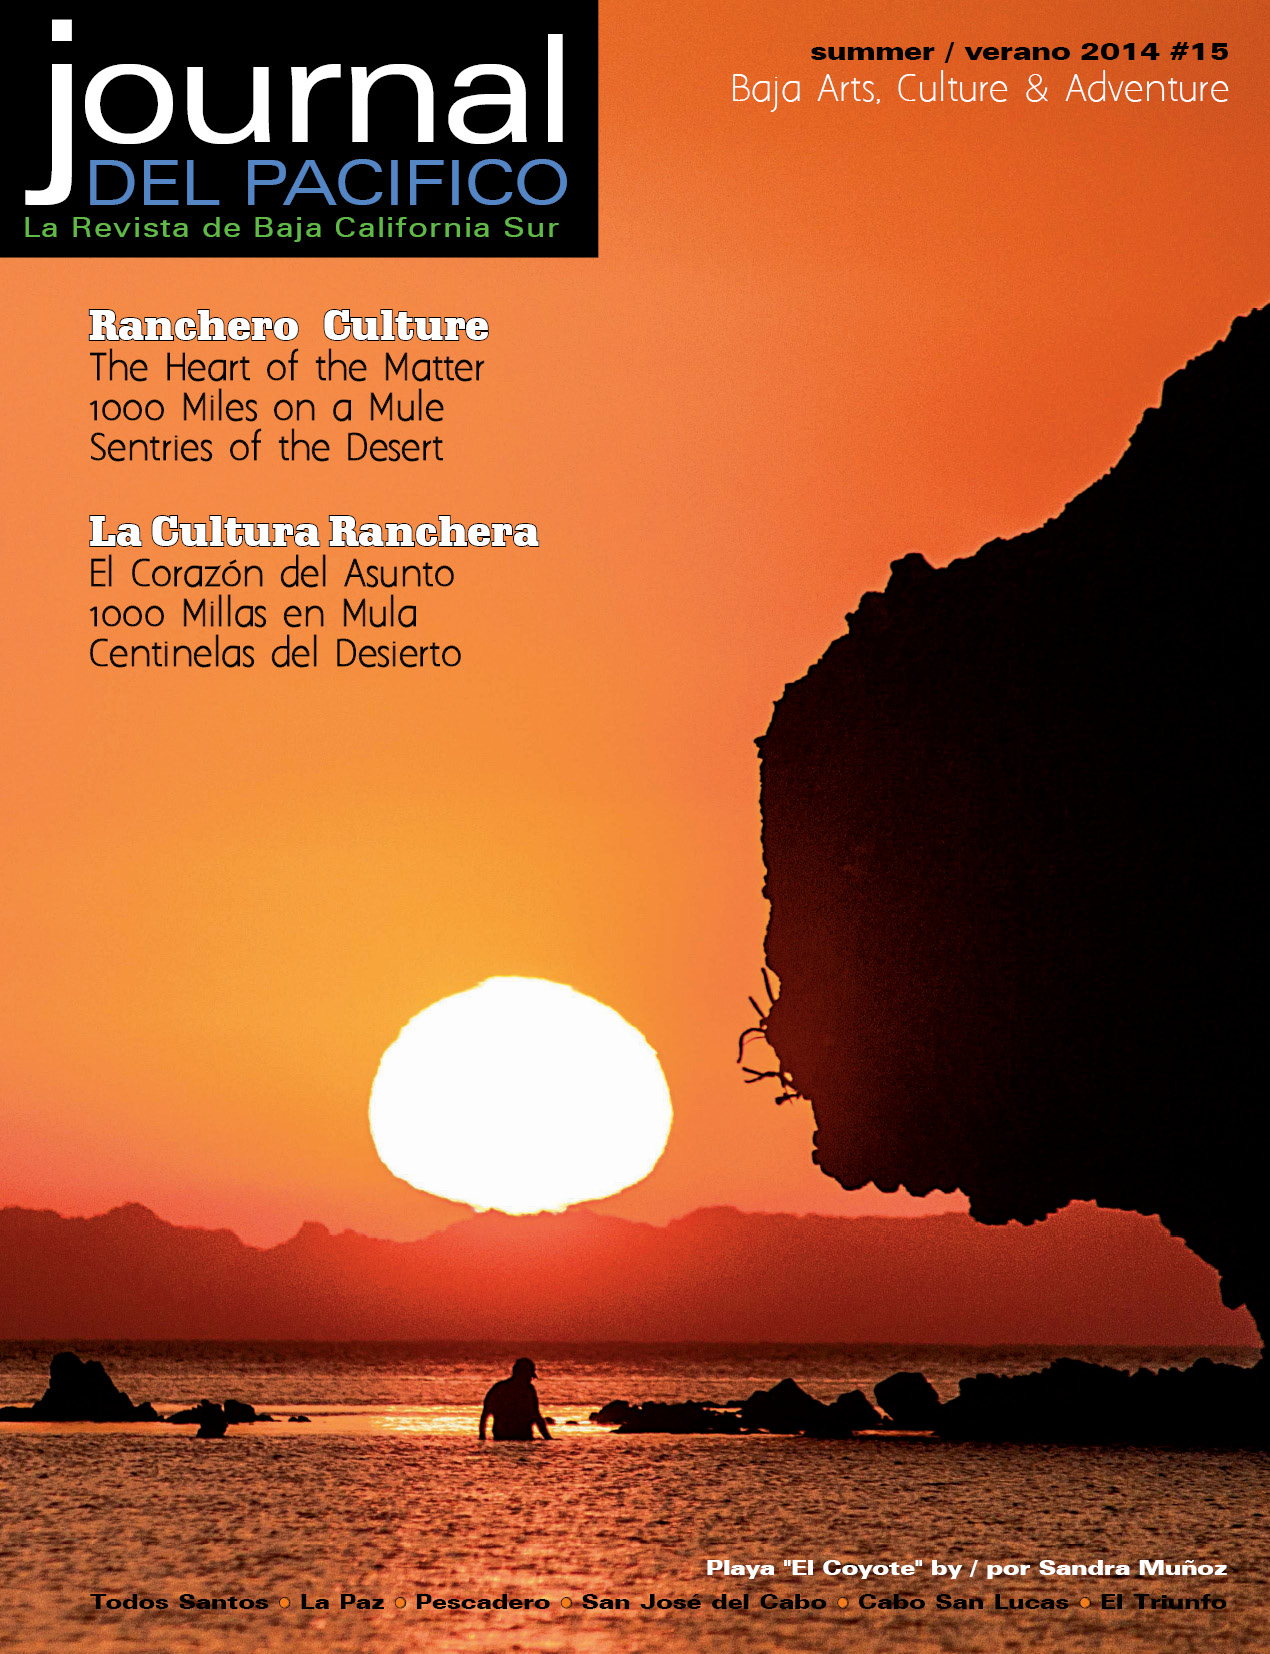 Summer 2014 Issue of Journal del Pacifico